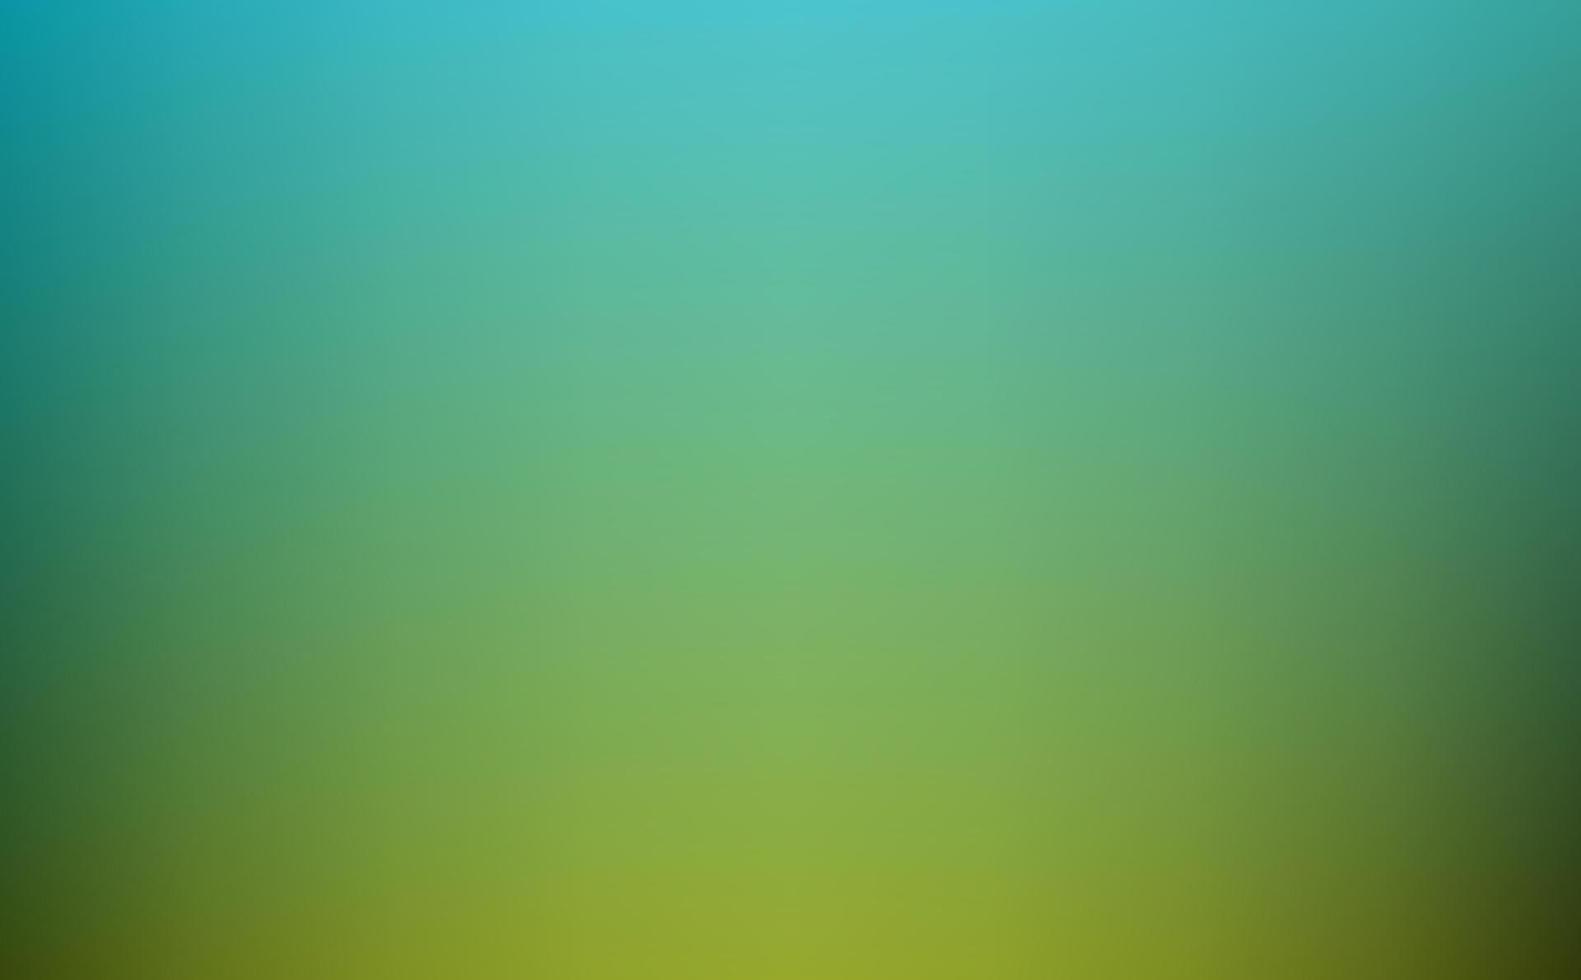 Abstract Gradient Colorful background. Blurred turquoise water backdrop. Vector illustration for your graphic design, banner, summer or aqua poster.